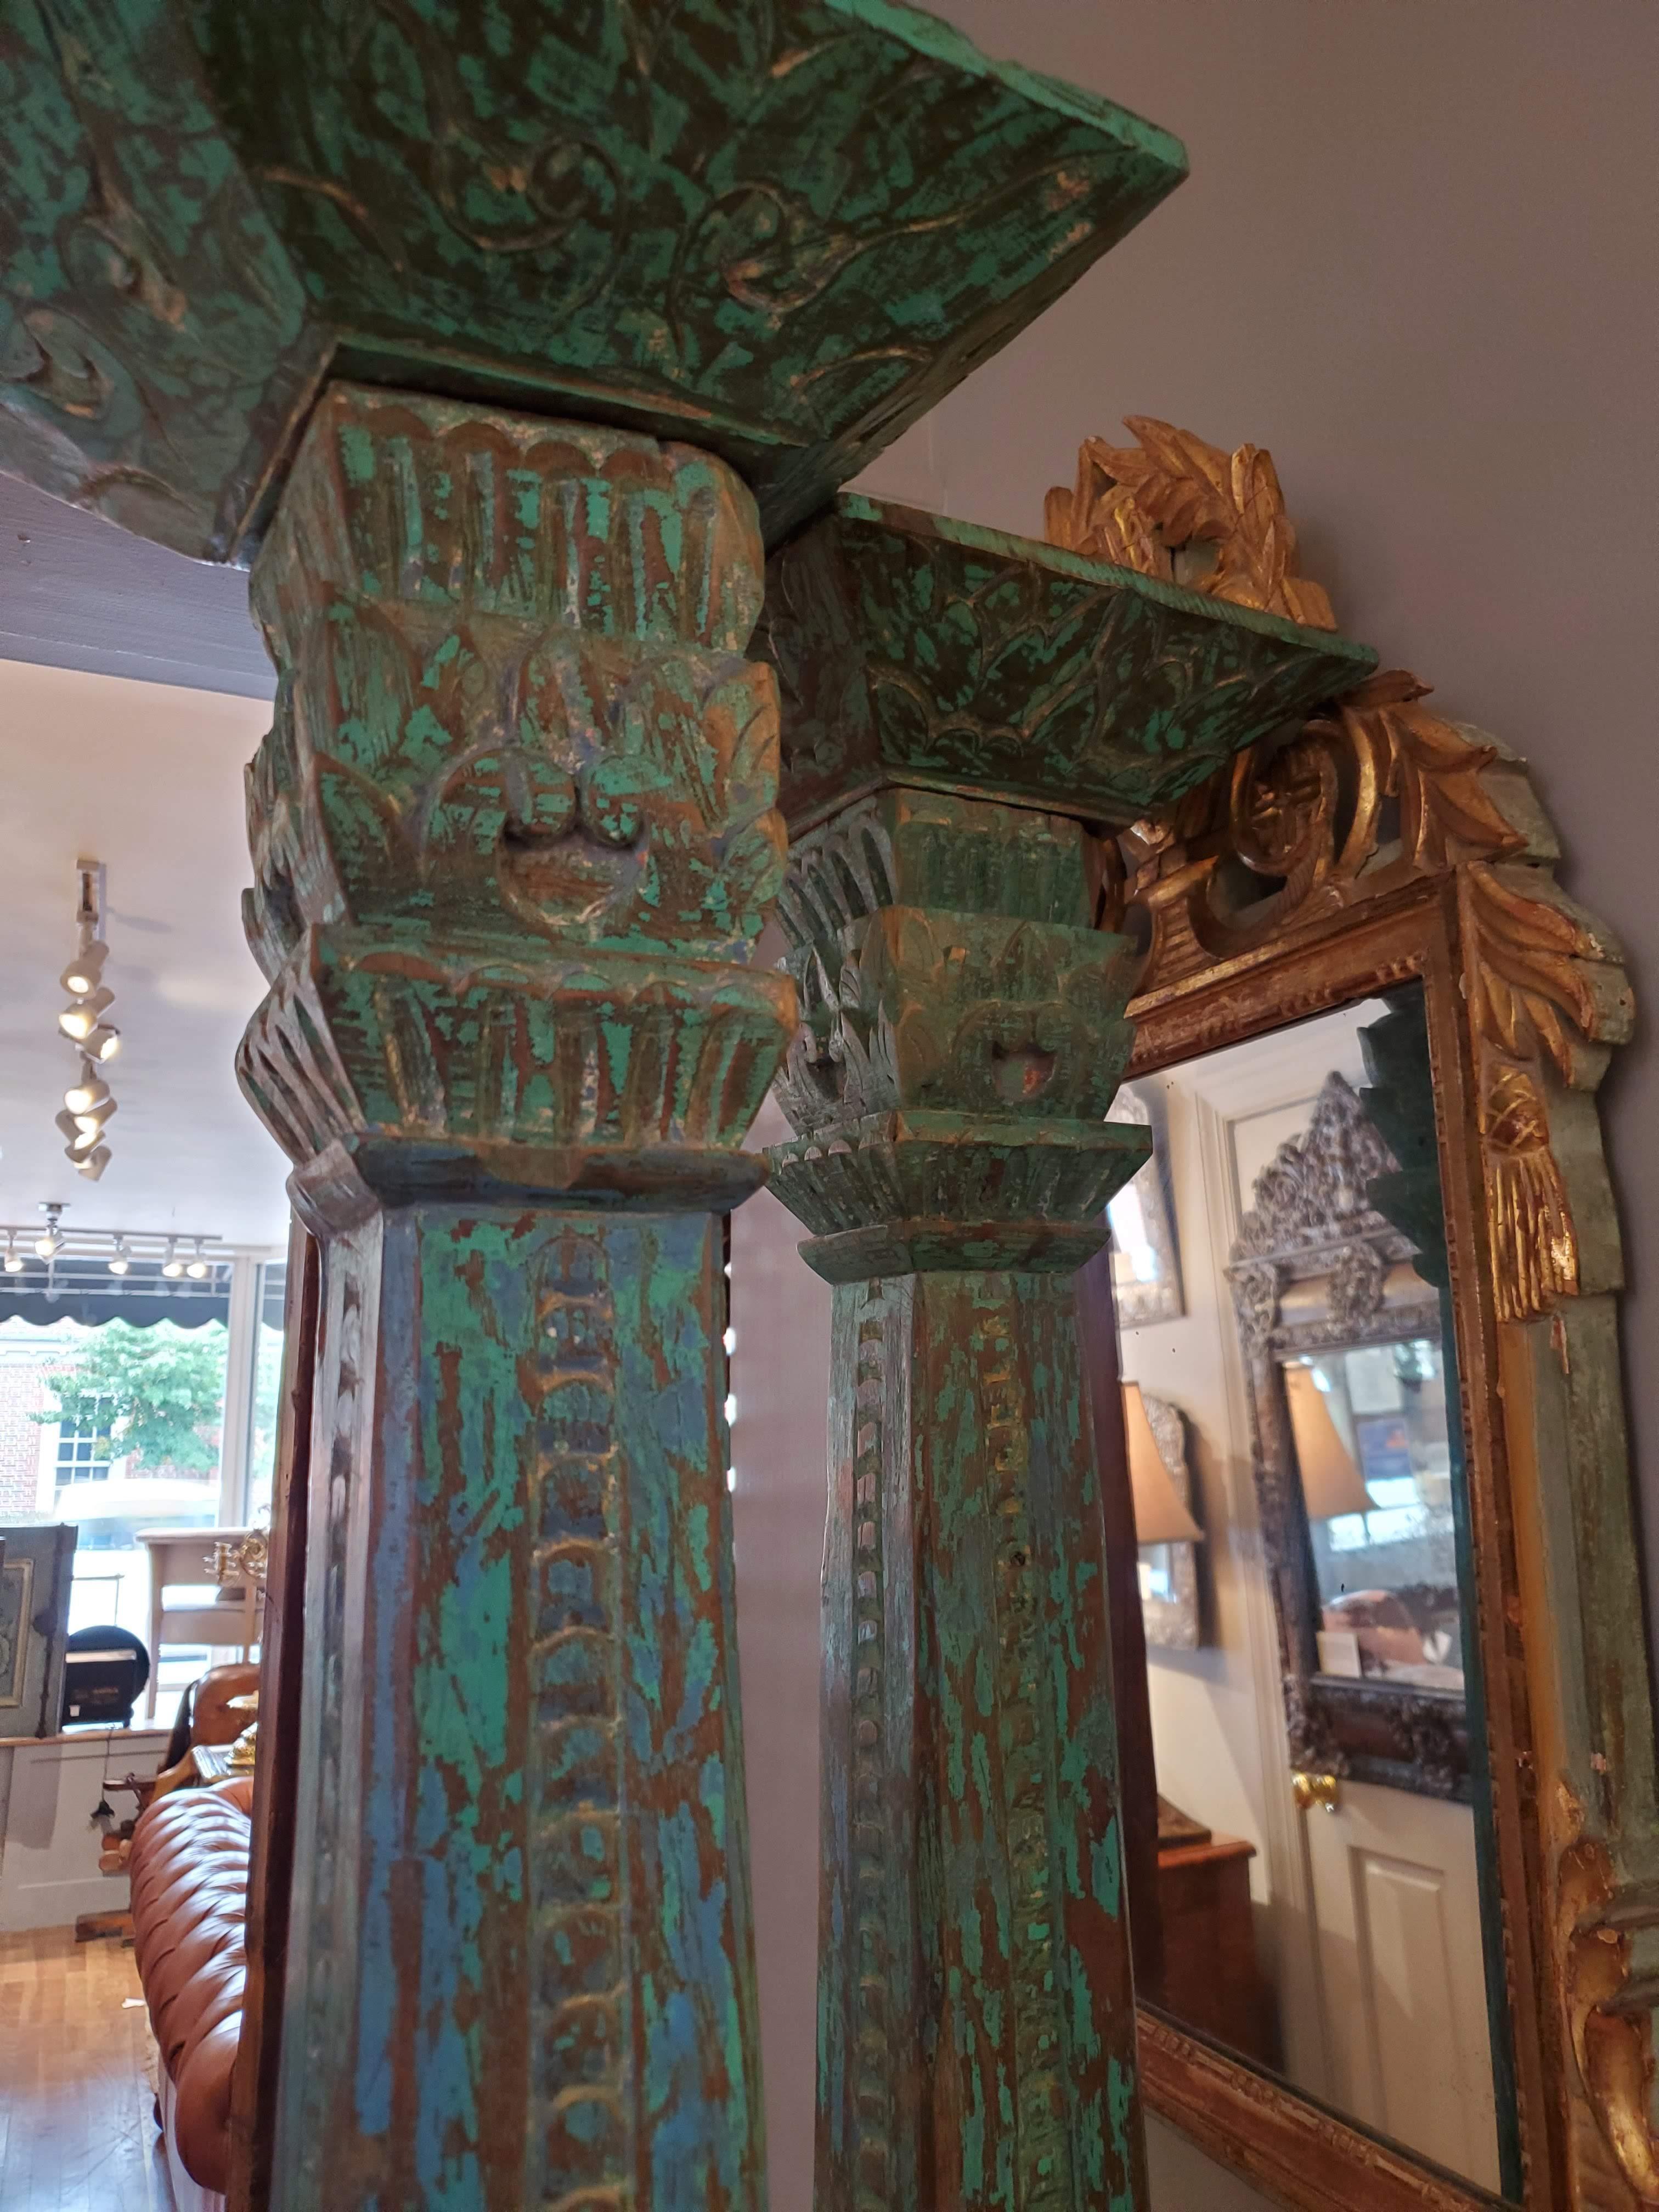 Made of teak, these unique 19th century hand carved columns have an intricate Indonesian decoration with the original blue and green painted finish. They are sure to add to bit of interest to your interior design project.
Java, circa